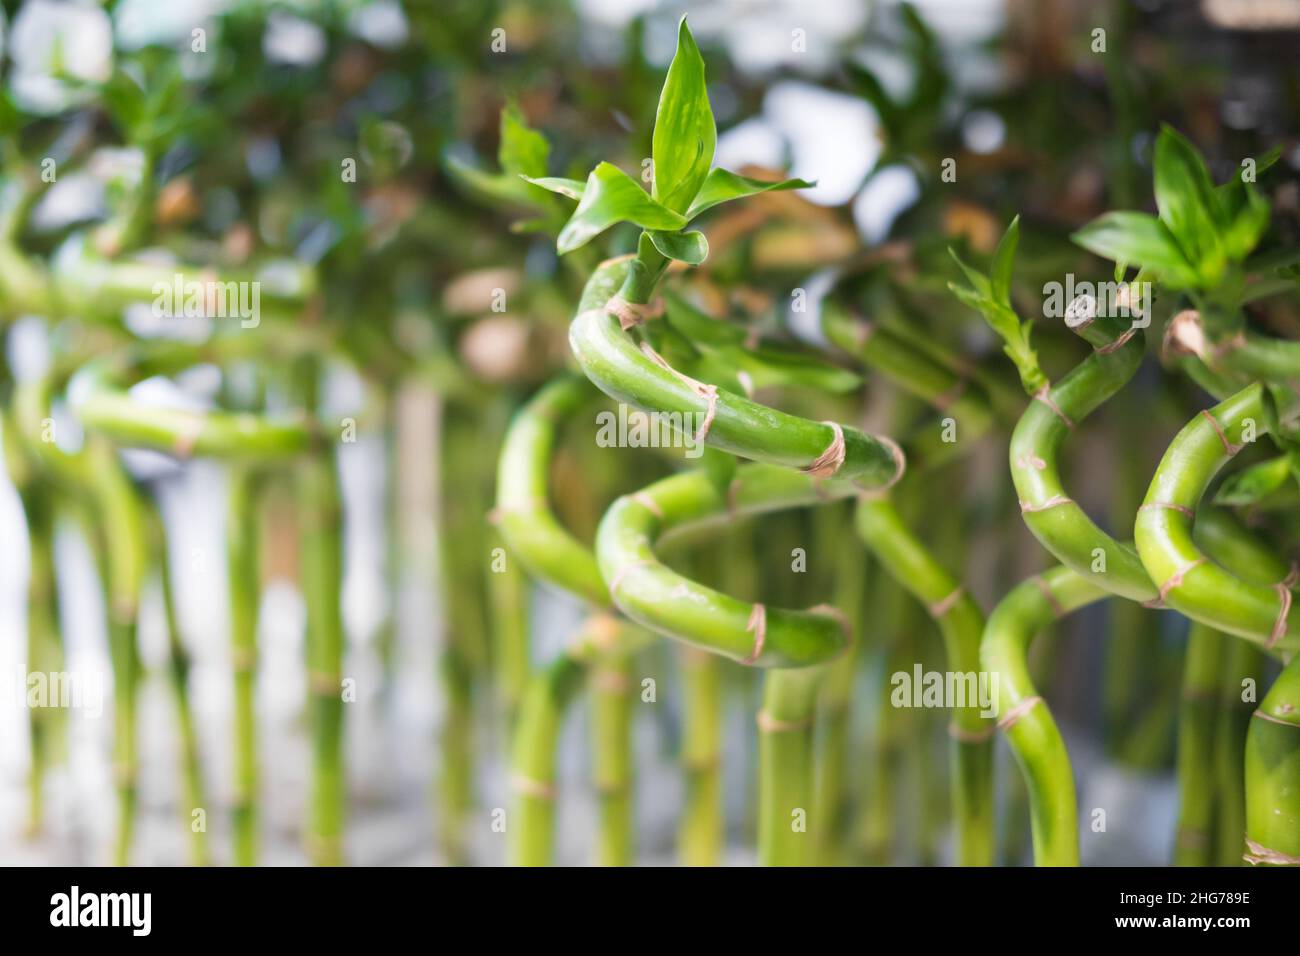 Young shoots of bamboo in the form of a houseplant. Stock Photo